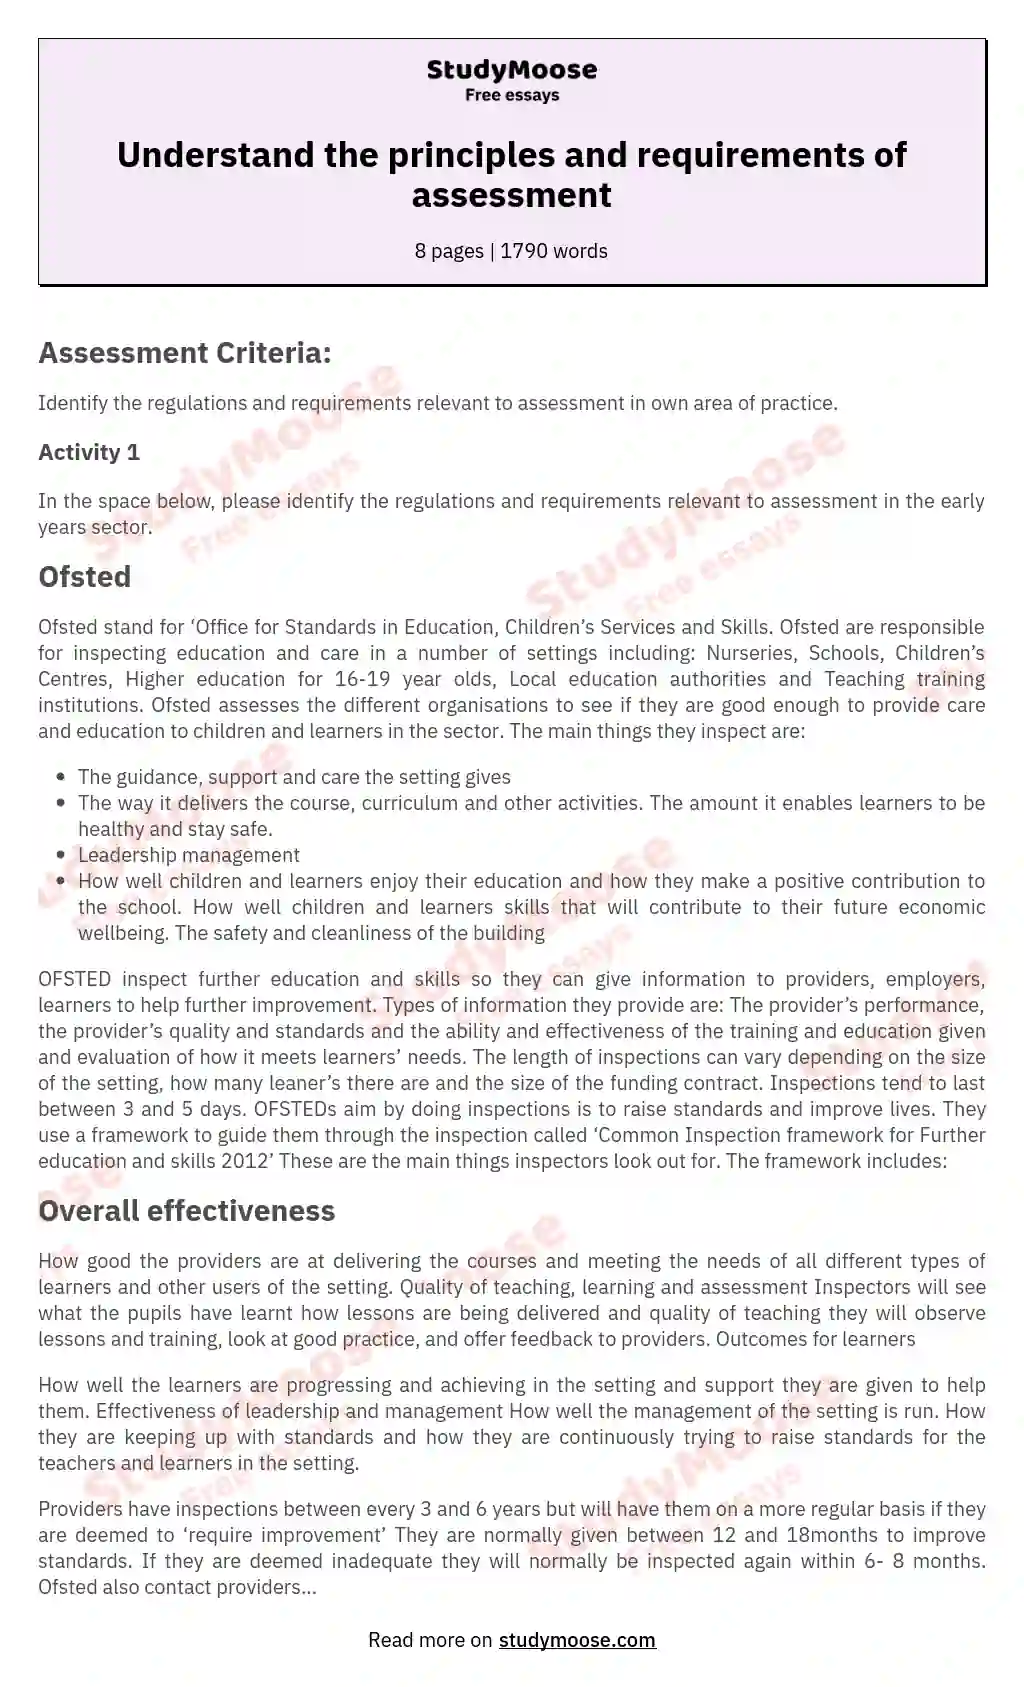 Understand the principles and requirements of assessment essay